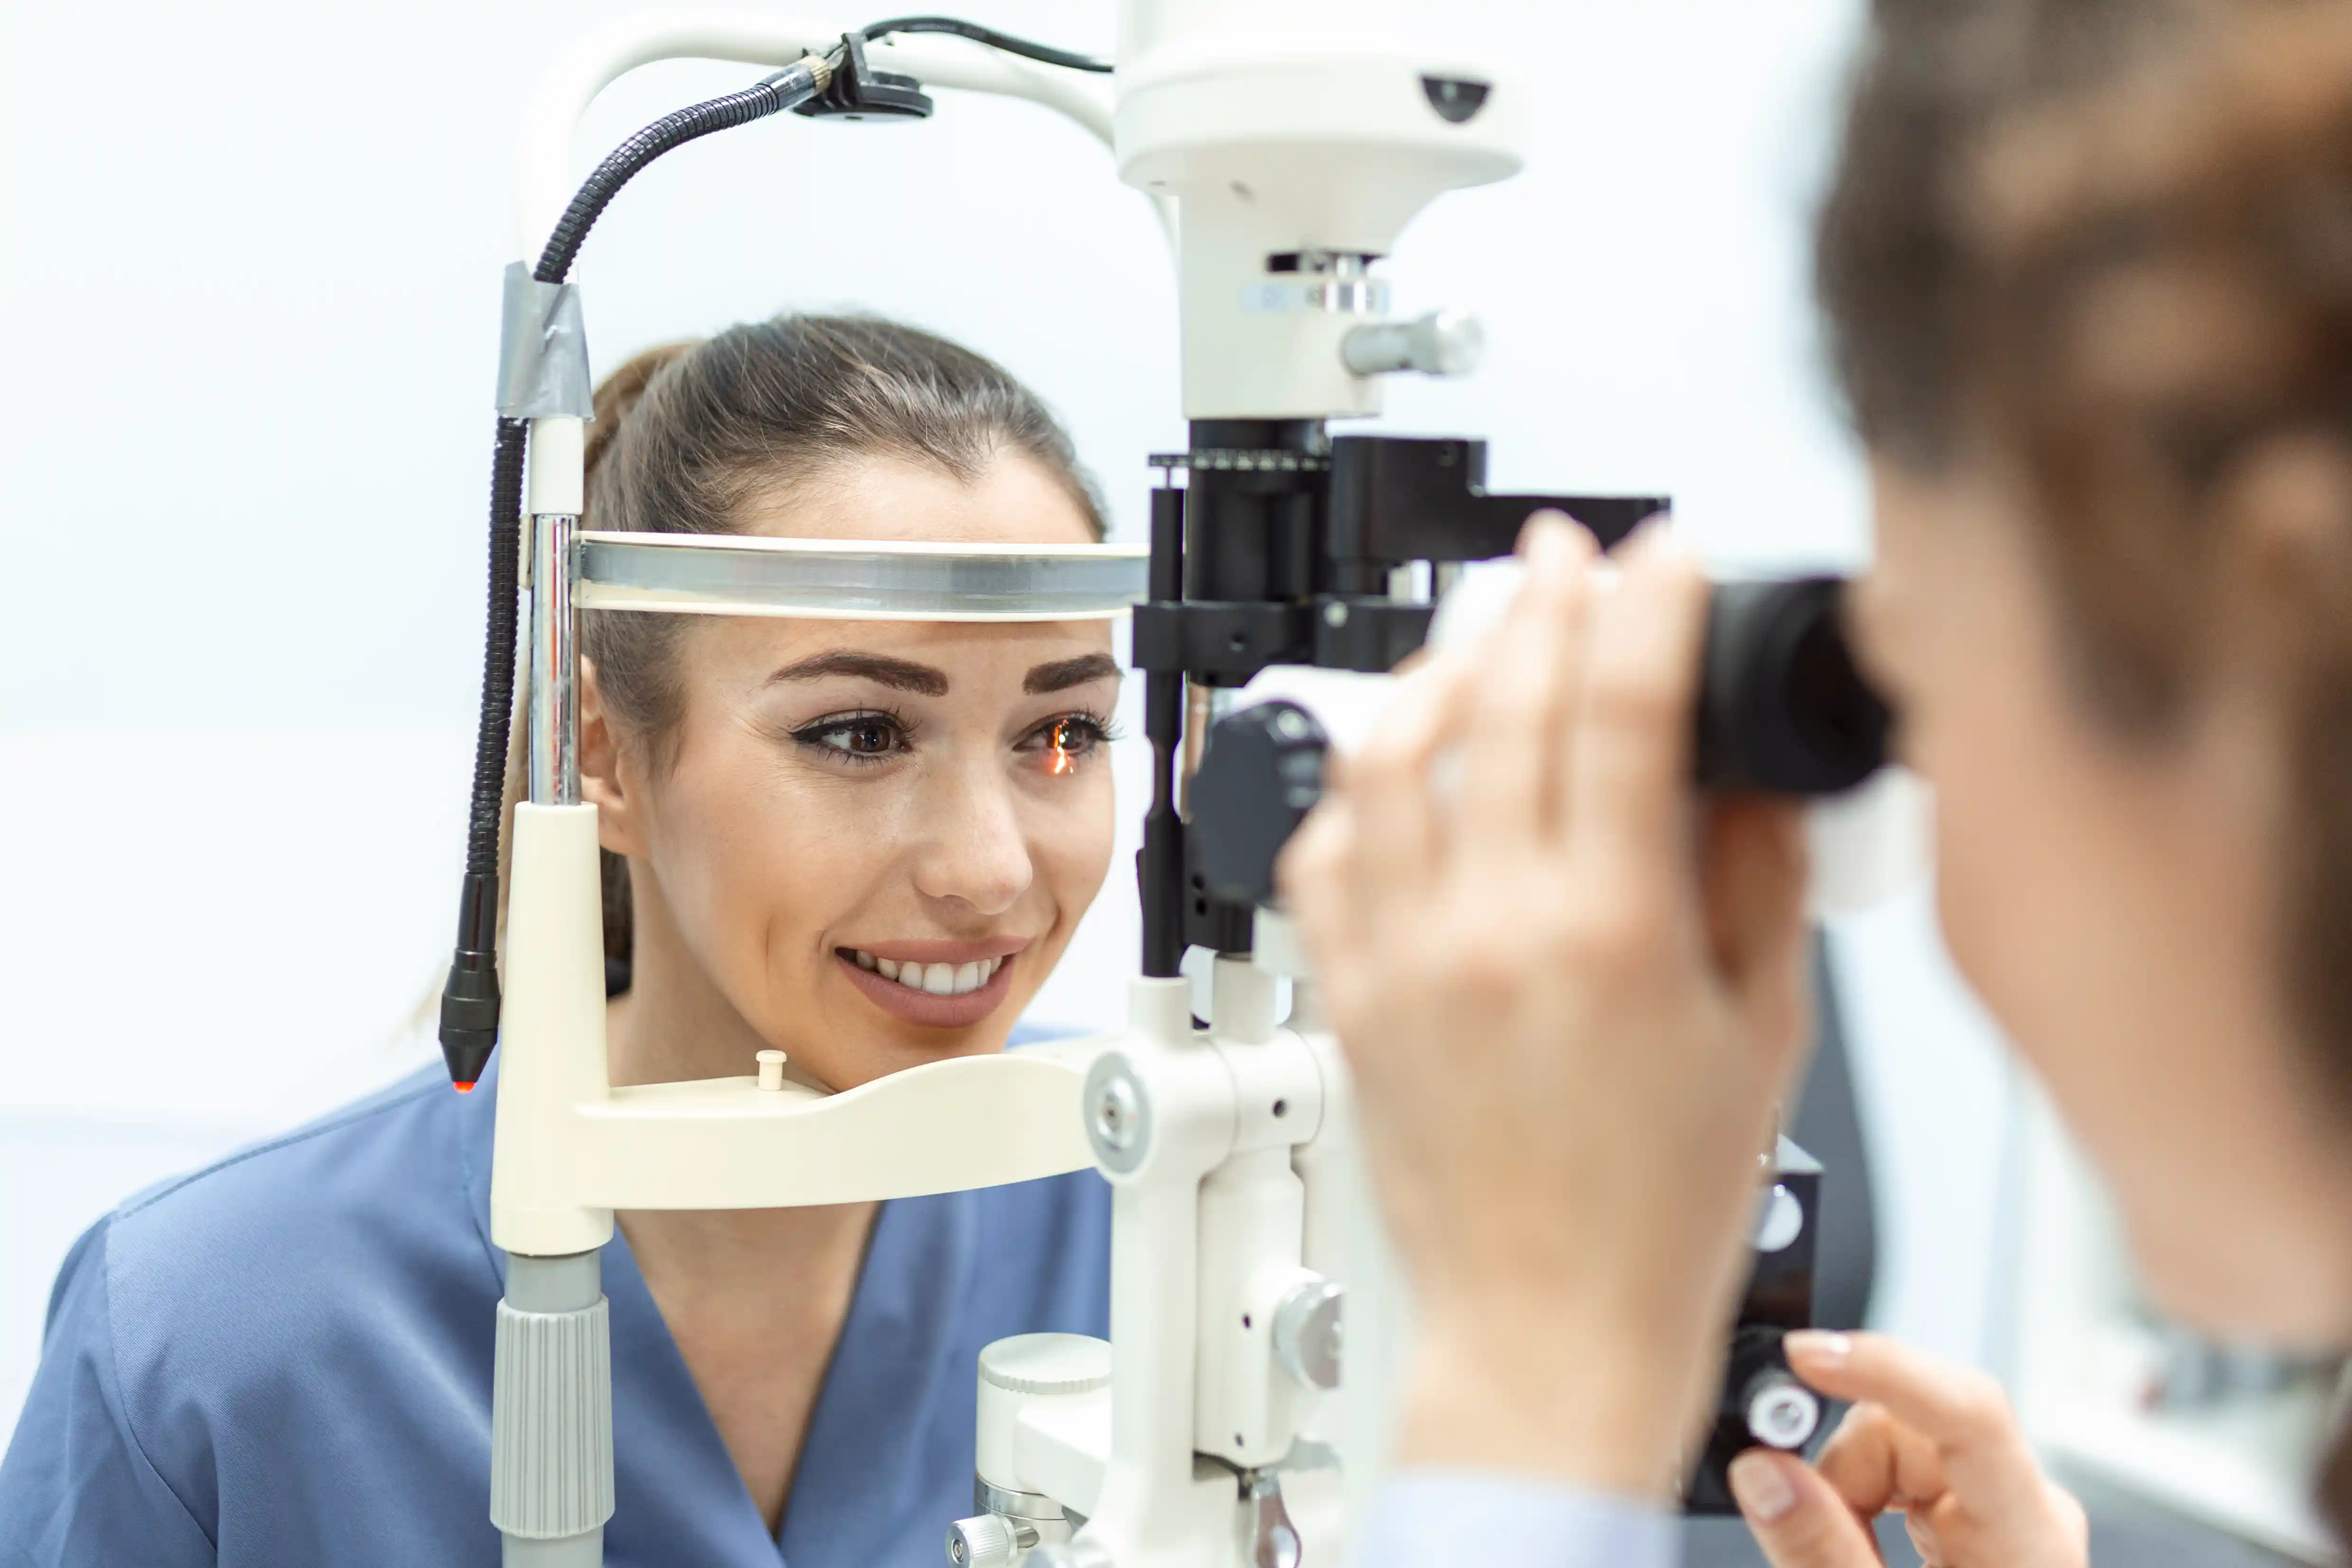 What to expect in a Bsc optometry course